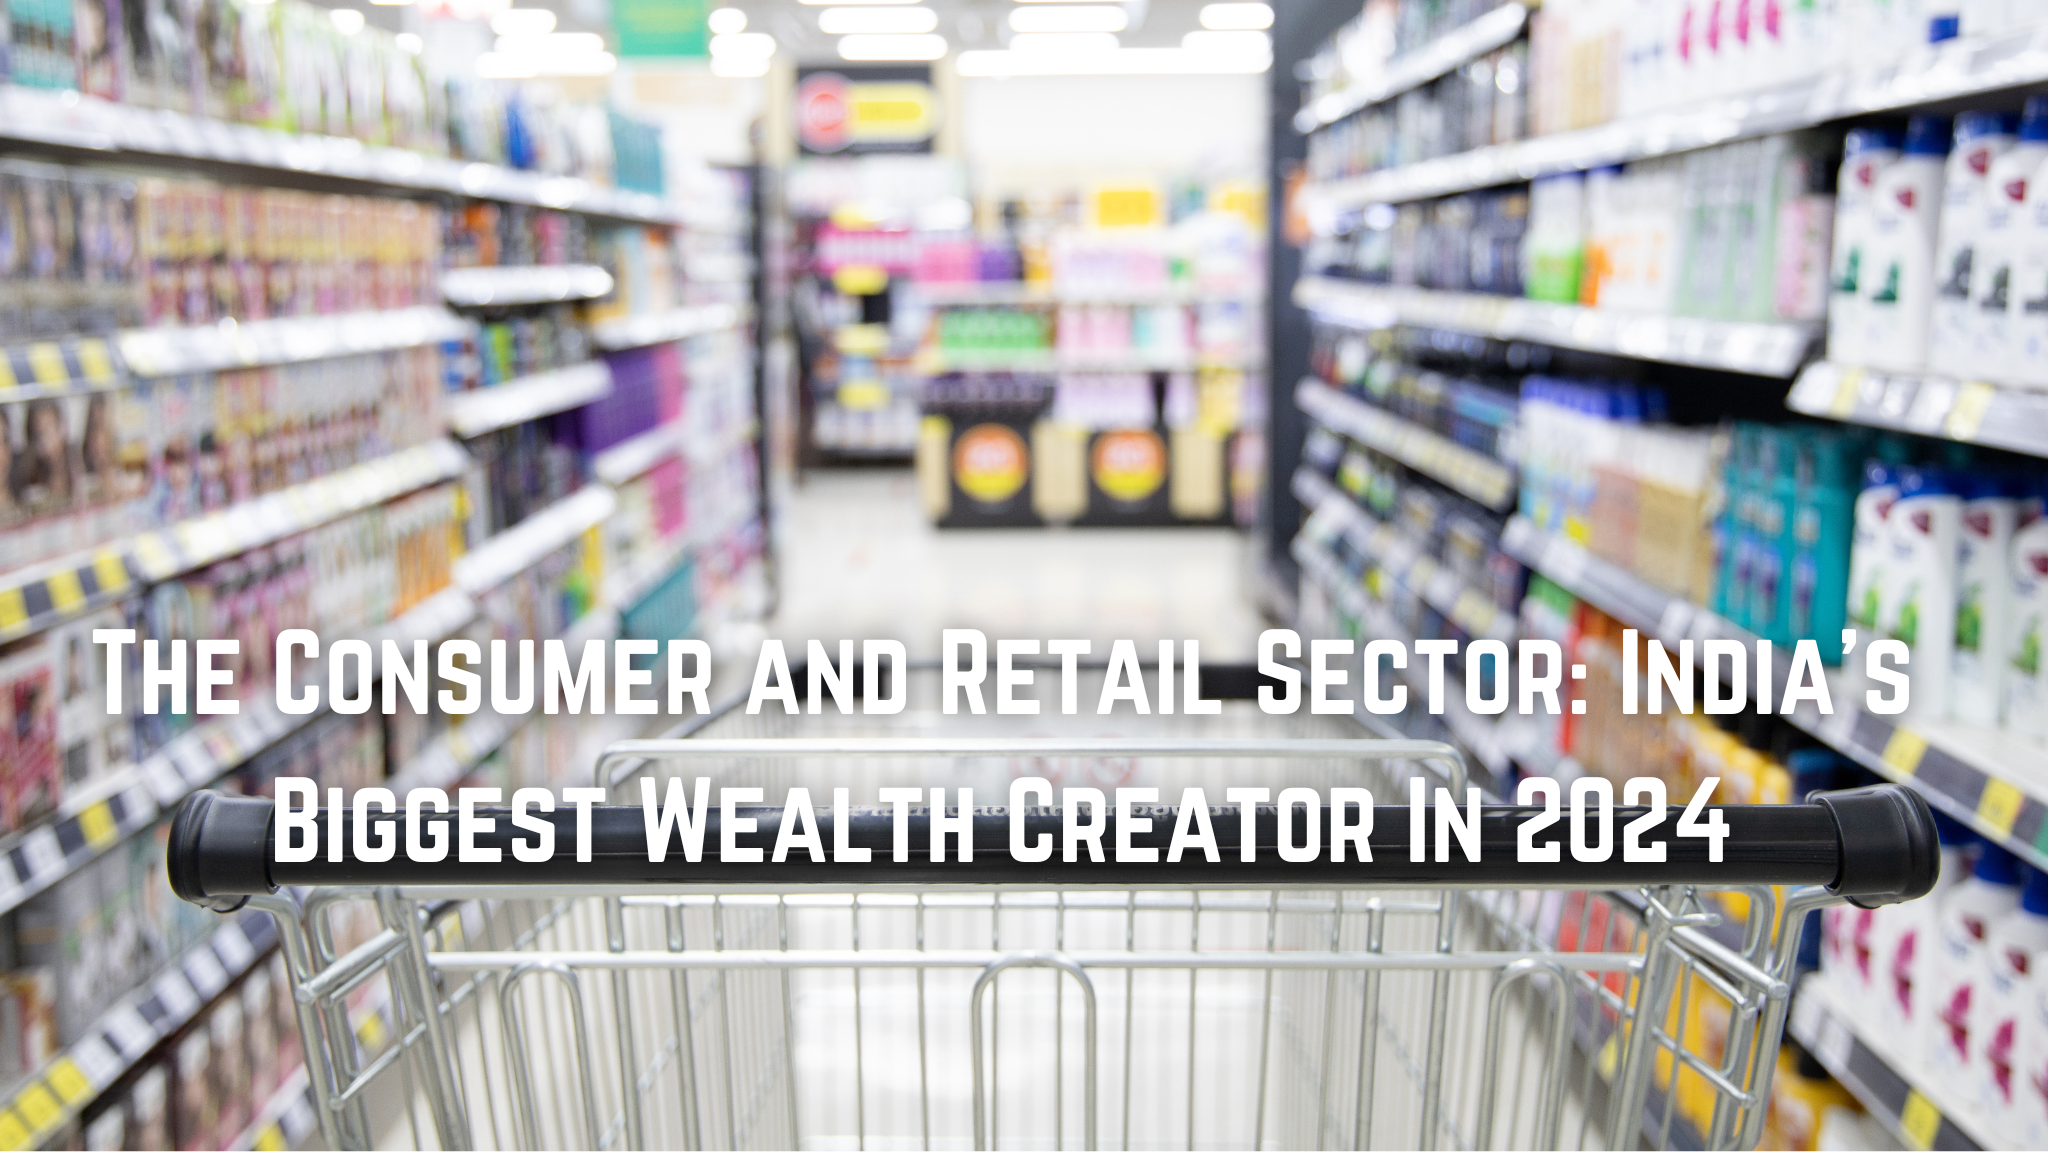 The Consumer and Retail Sector: India's Biggest Wealth Creator In 2024